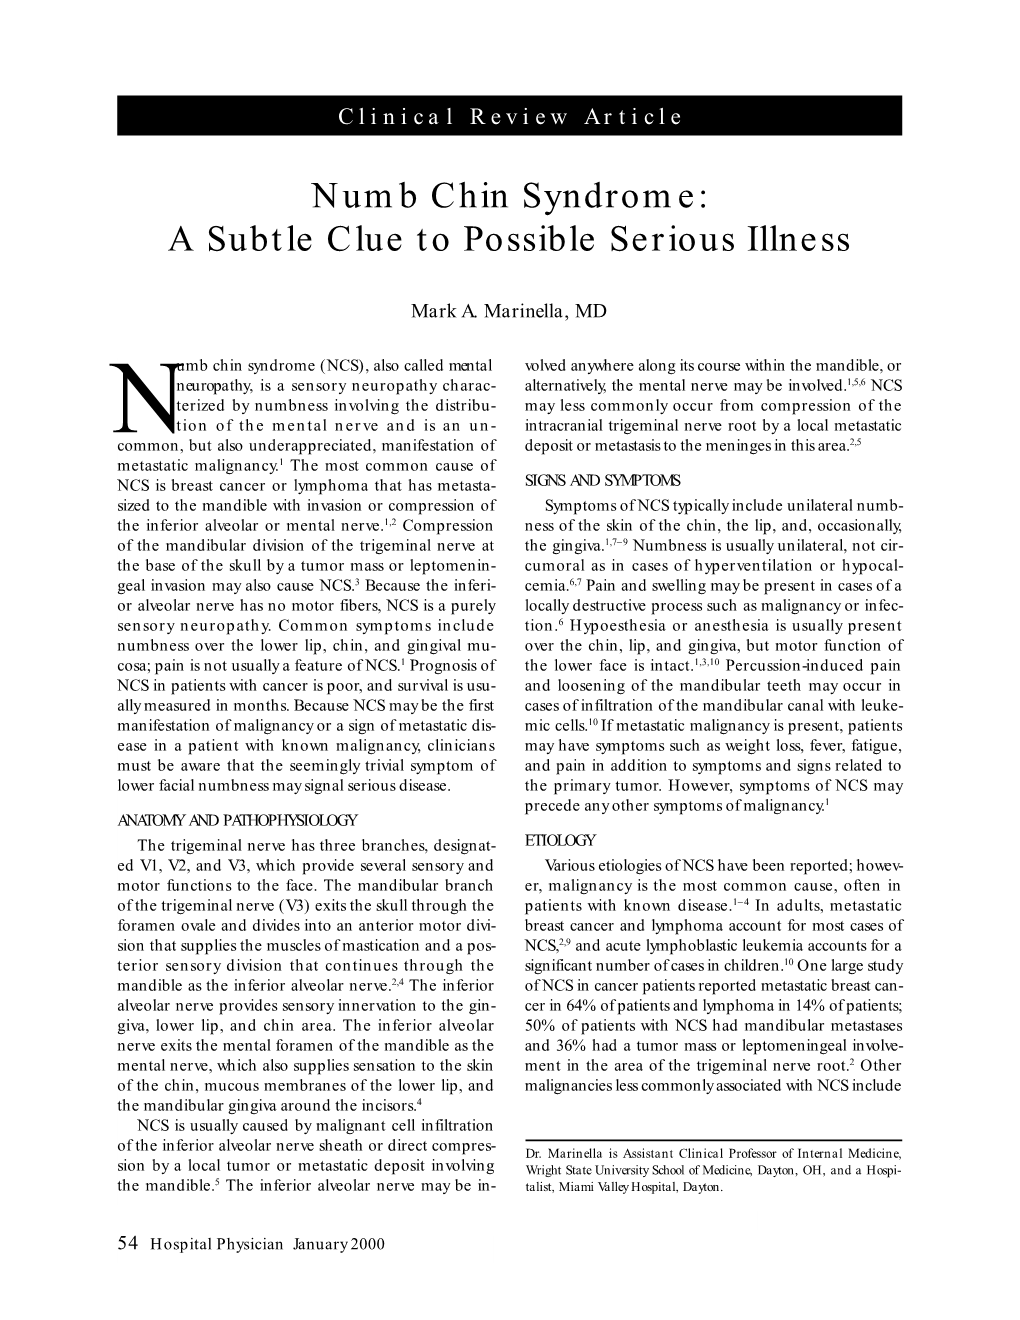 Numb Chin Syndrome: a Subtle Clue to Possible Serious Illness